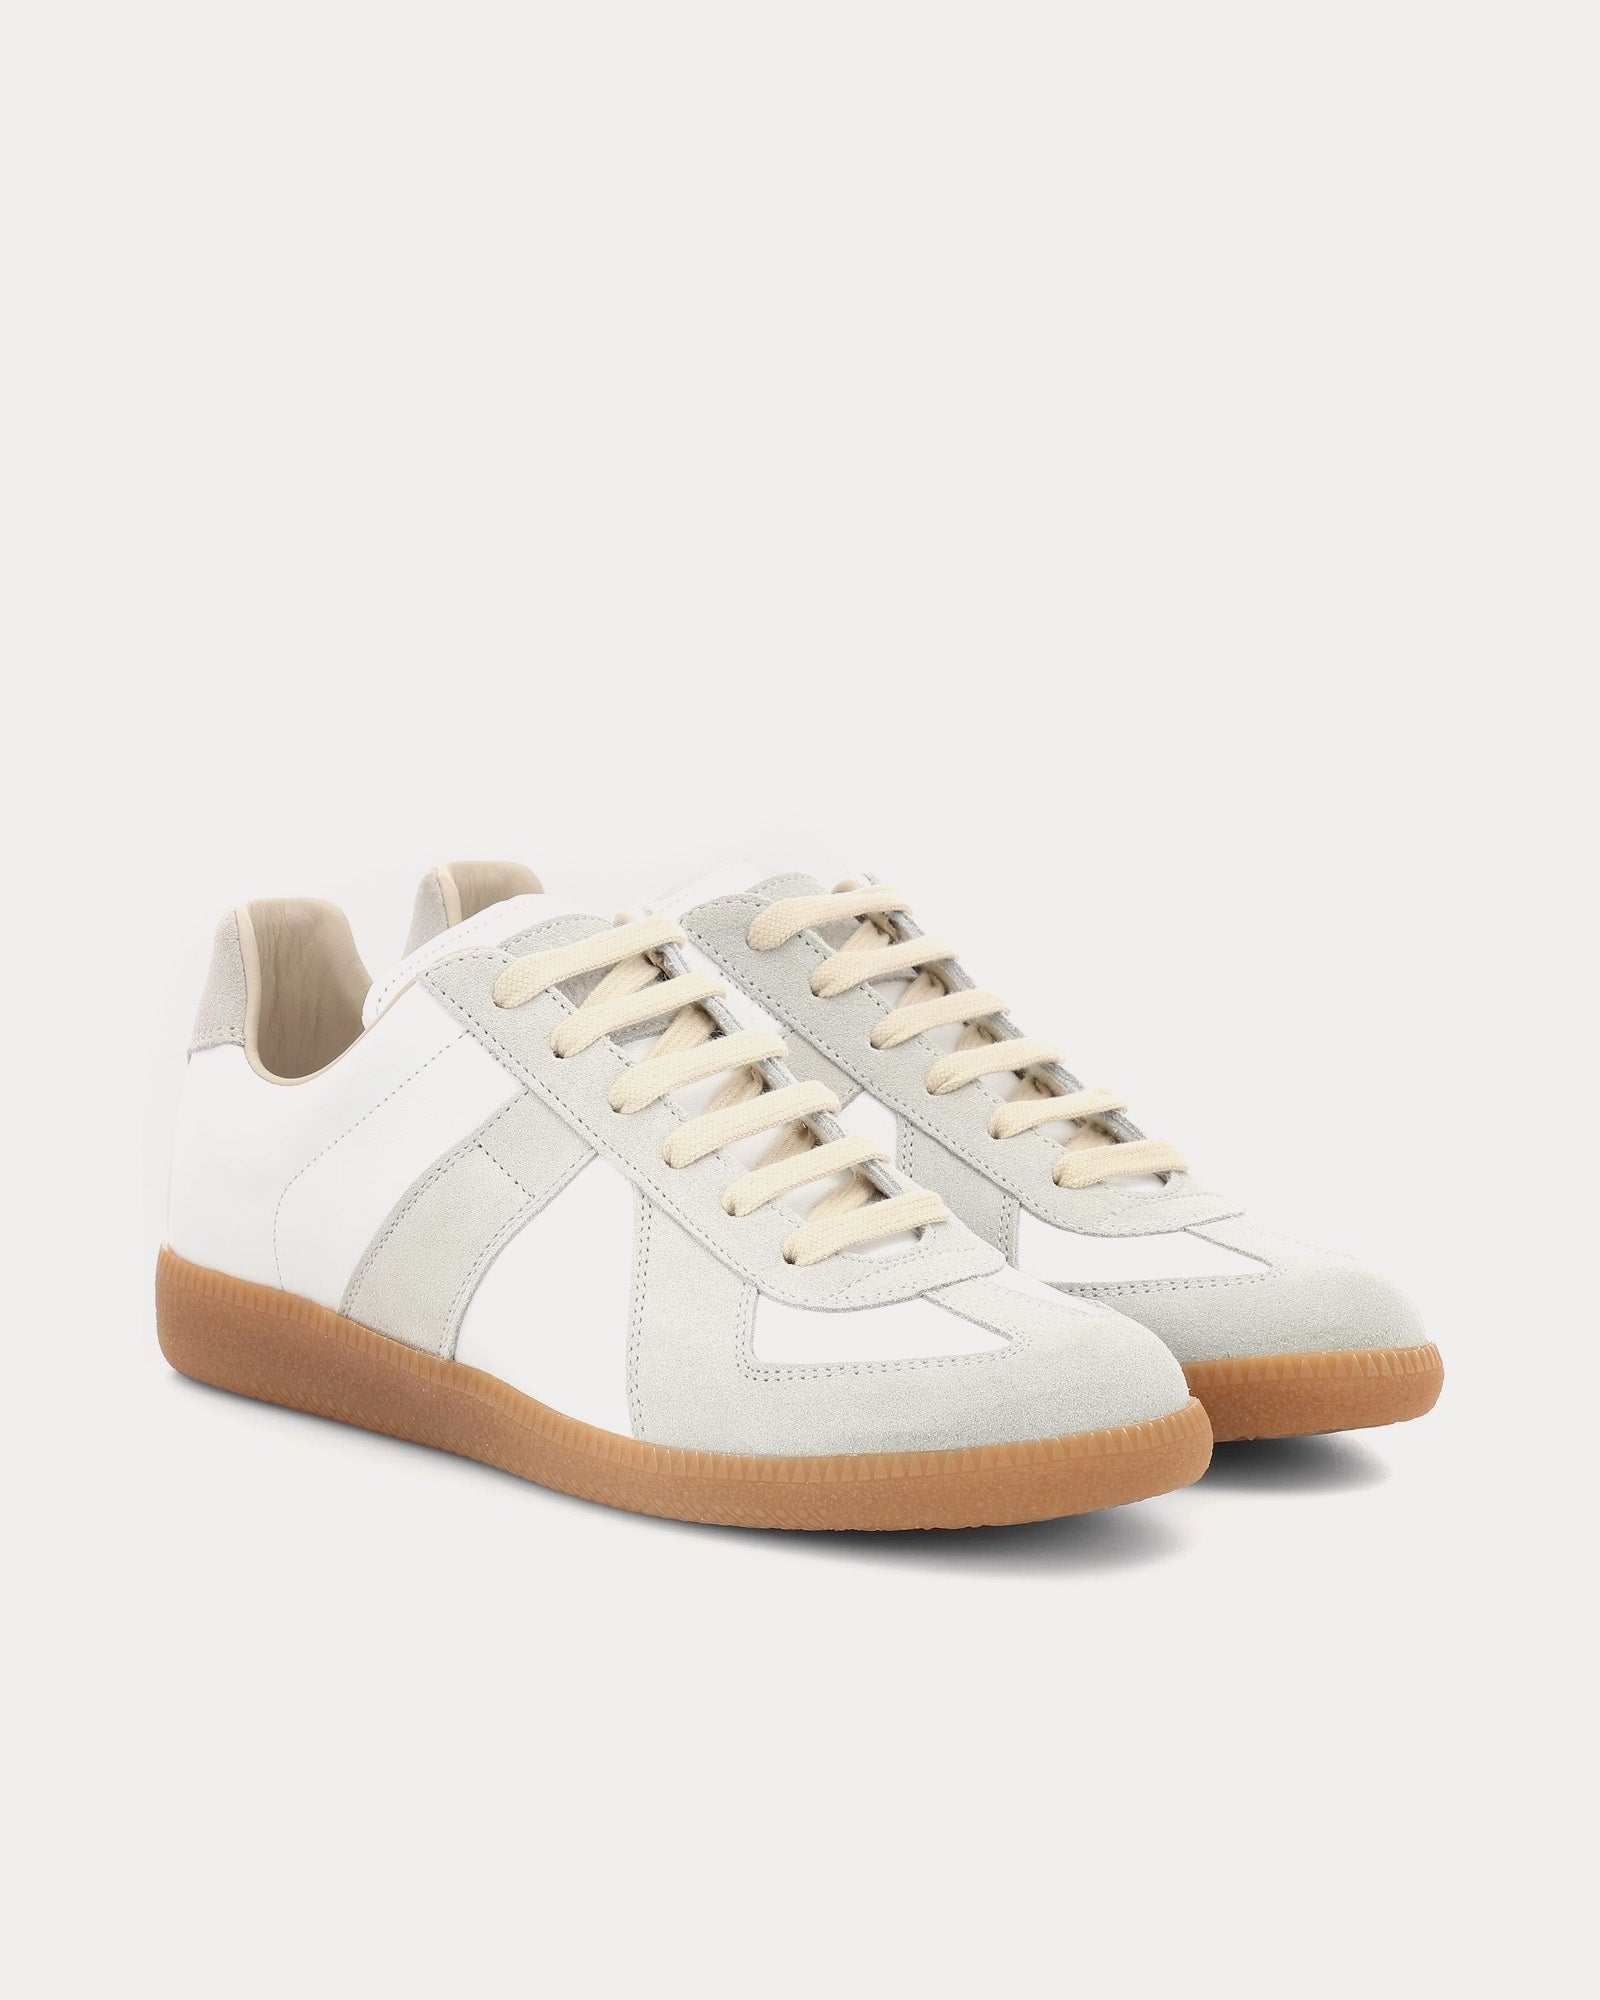 Maison Margiela - Replica Leather Dirty White Low Top Sneakers